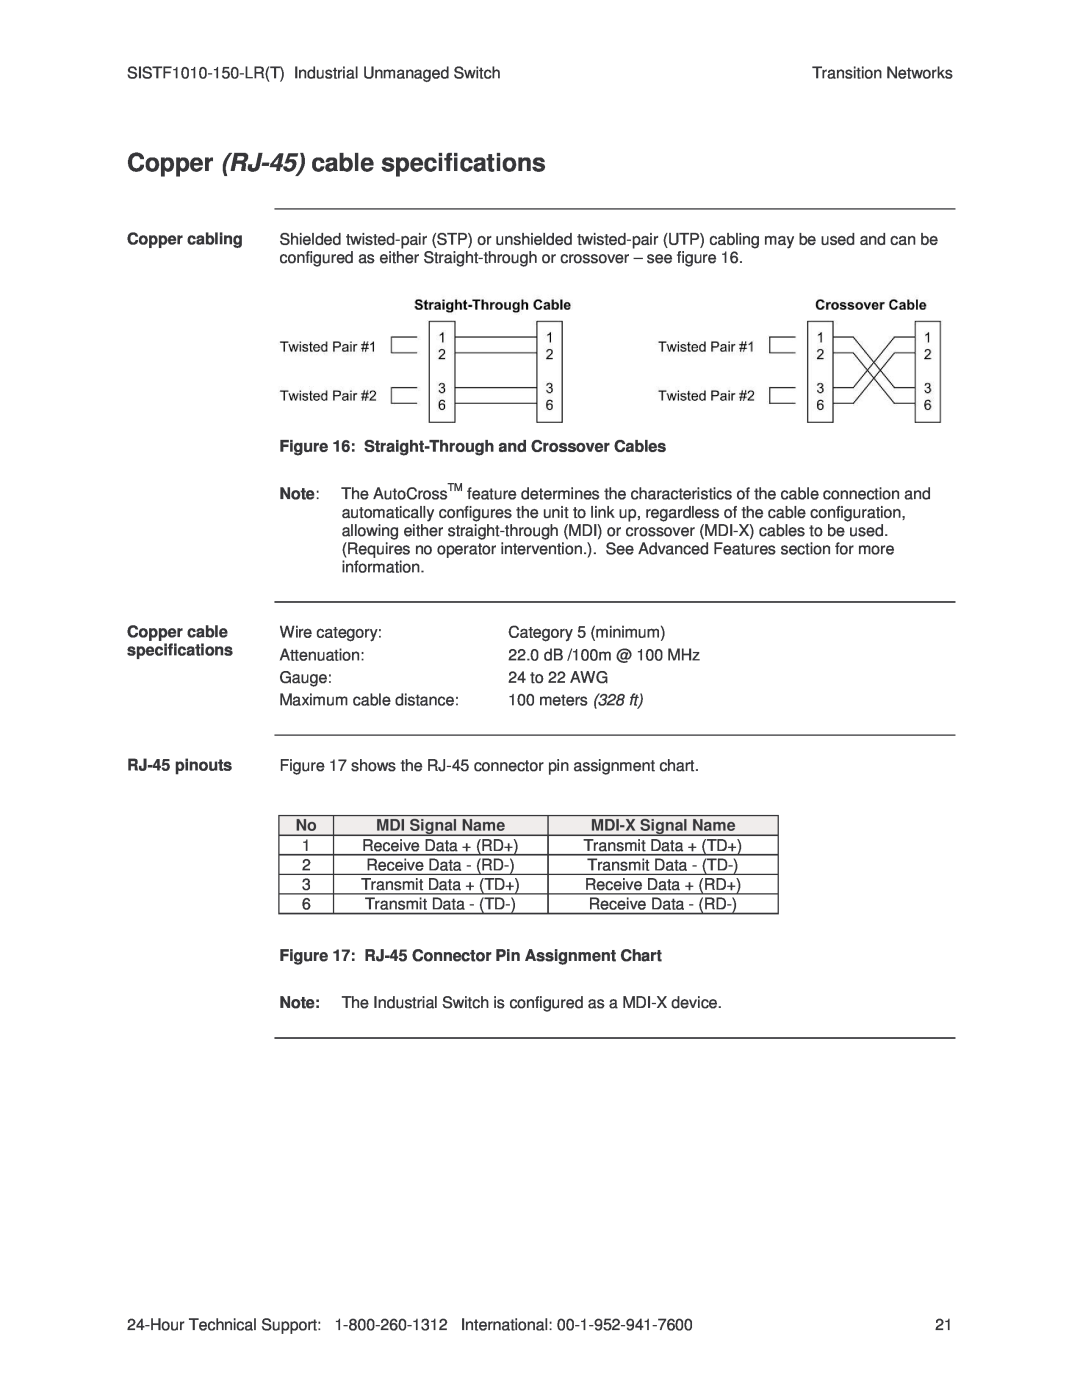 Transition Networks SISTF1010-150-LR(T) installation manual Copper RJ-45 cable specifications 